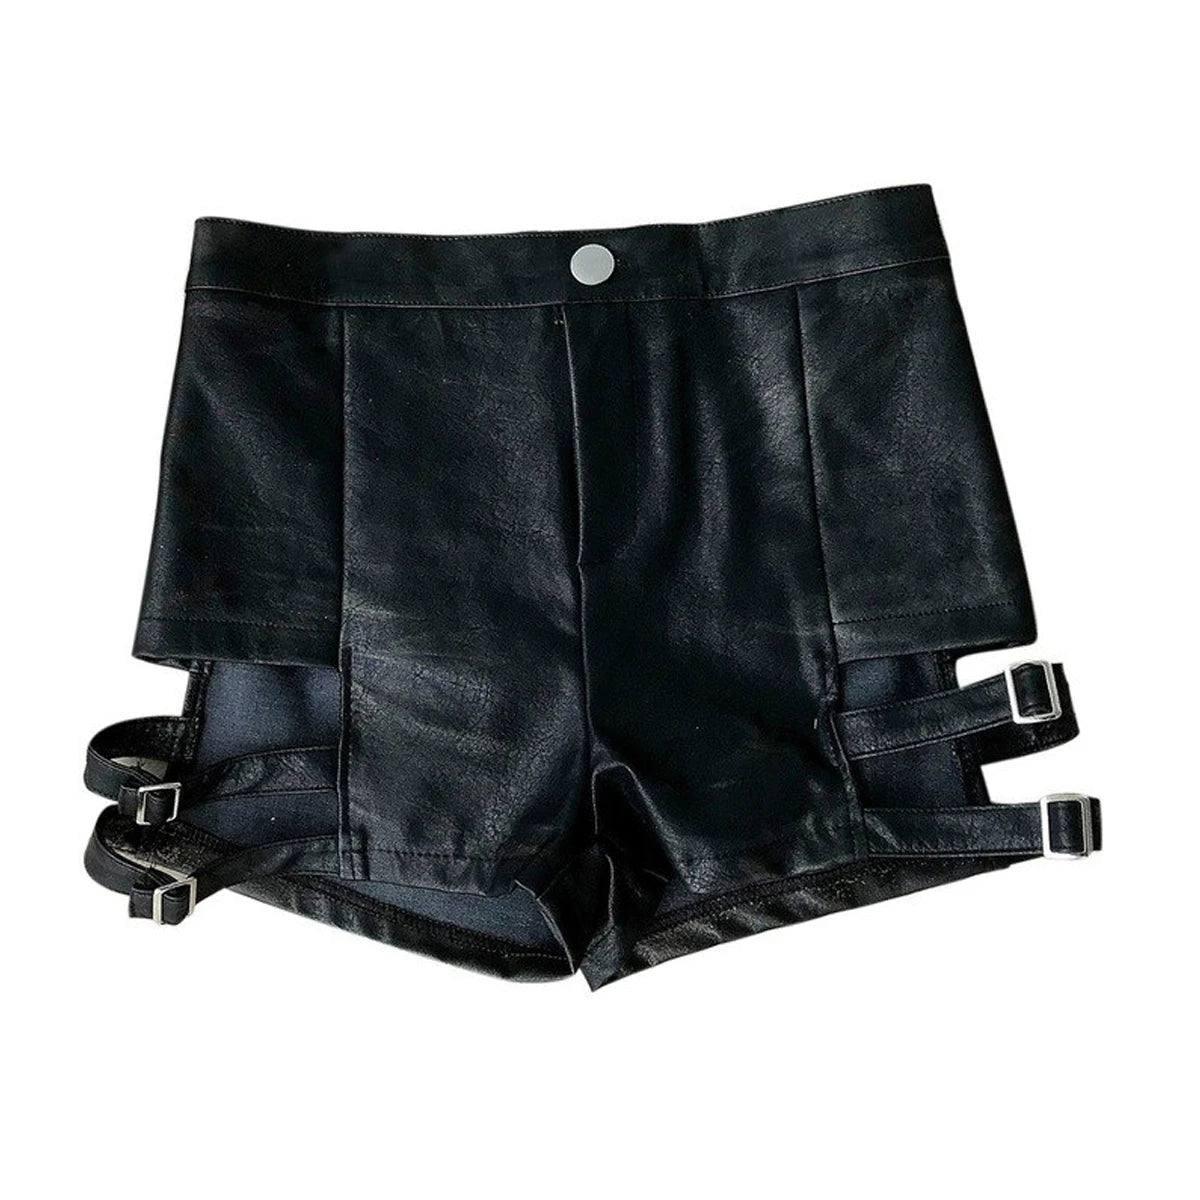 Trendy Strappy Leather Shorts for Edgy Fashion Looks-5